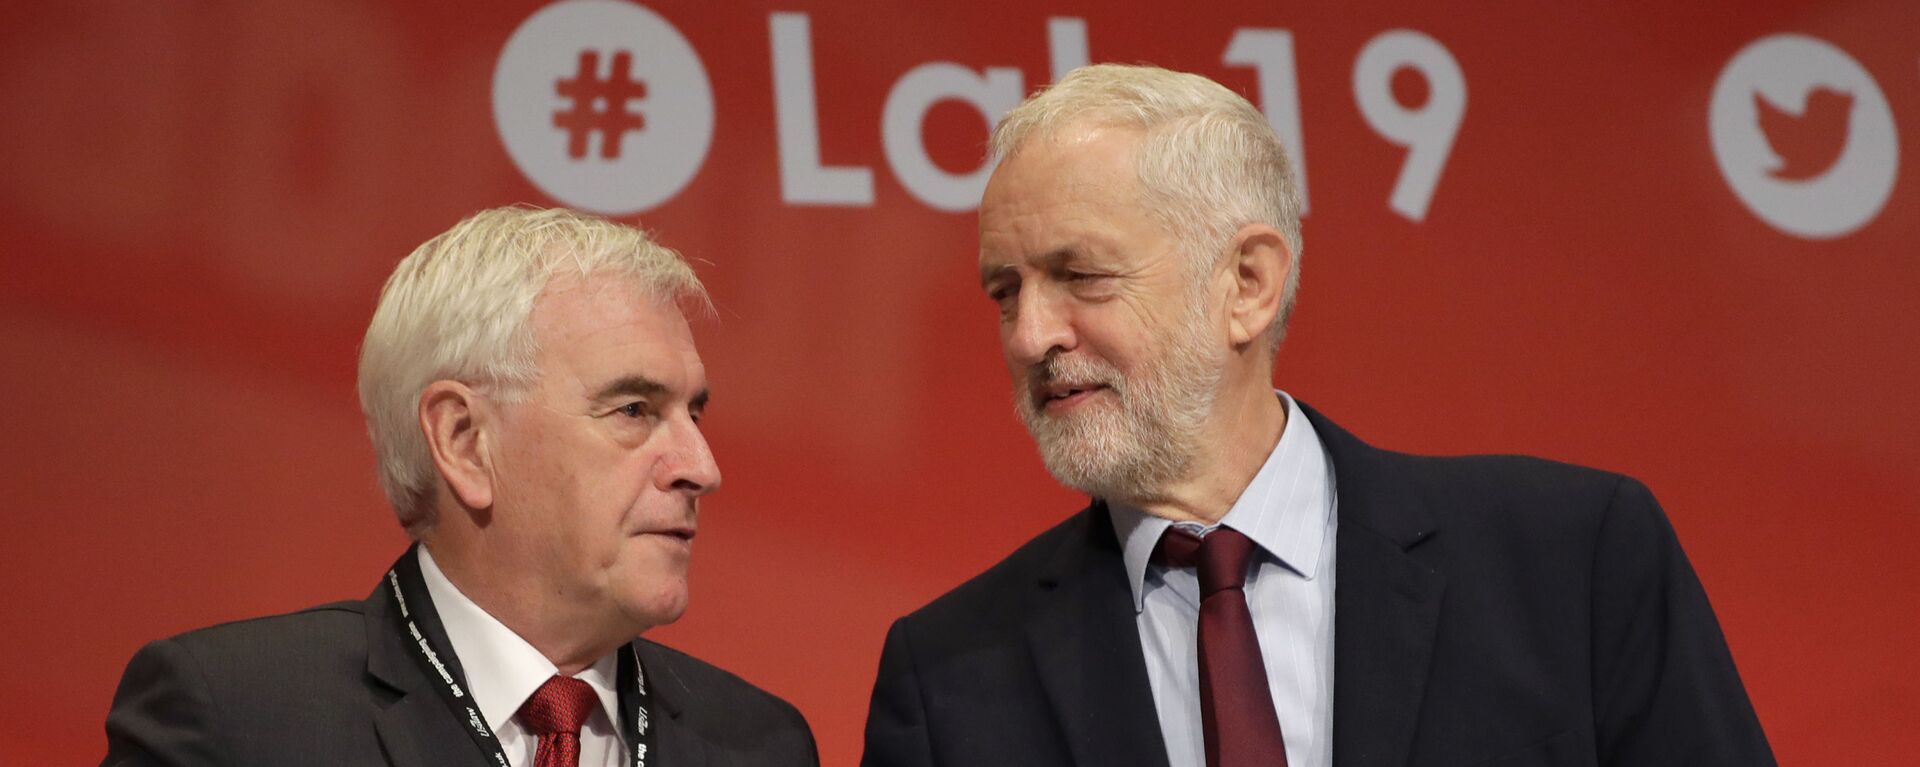 Jeremy Corbyn, leader of Britain's opposition Labour Party, right, and John McDonnell Shadow Chancellor on stage during the Labour Party Conference at the Brighton Centre , Tuesday, Sept. 24, 2019. - Sputnik International, 1920, 21.11.2021